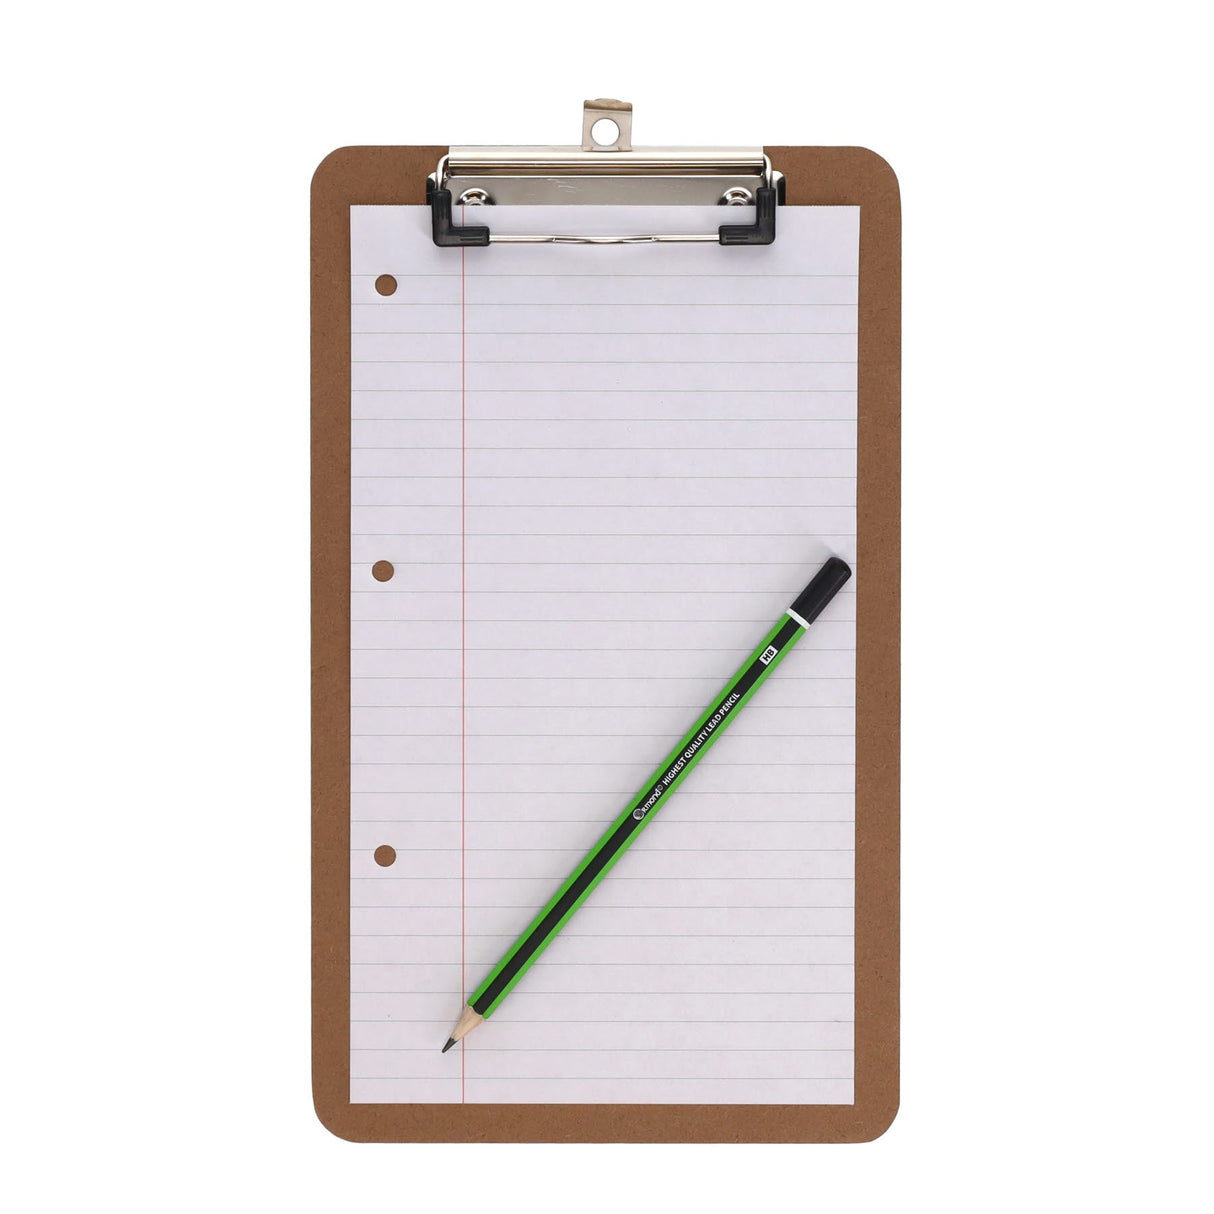 Concept 6.5x11 Wooden Clipboard-Clipboards-Concept|StationeryShop.co.uk